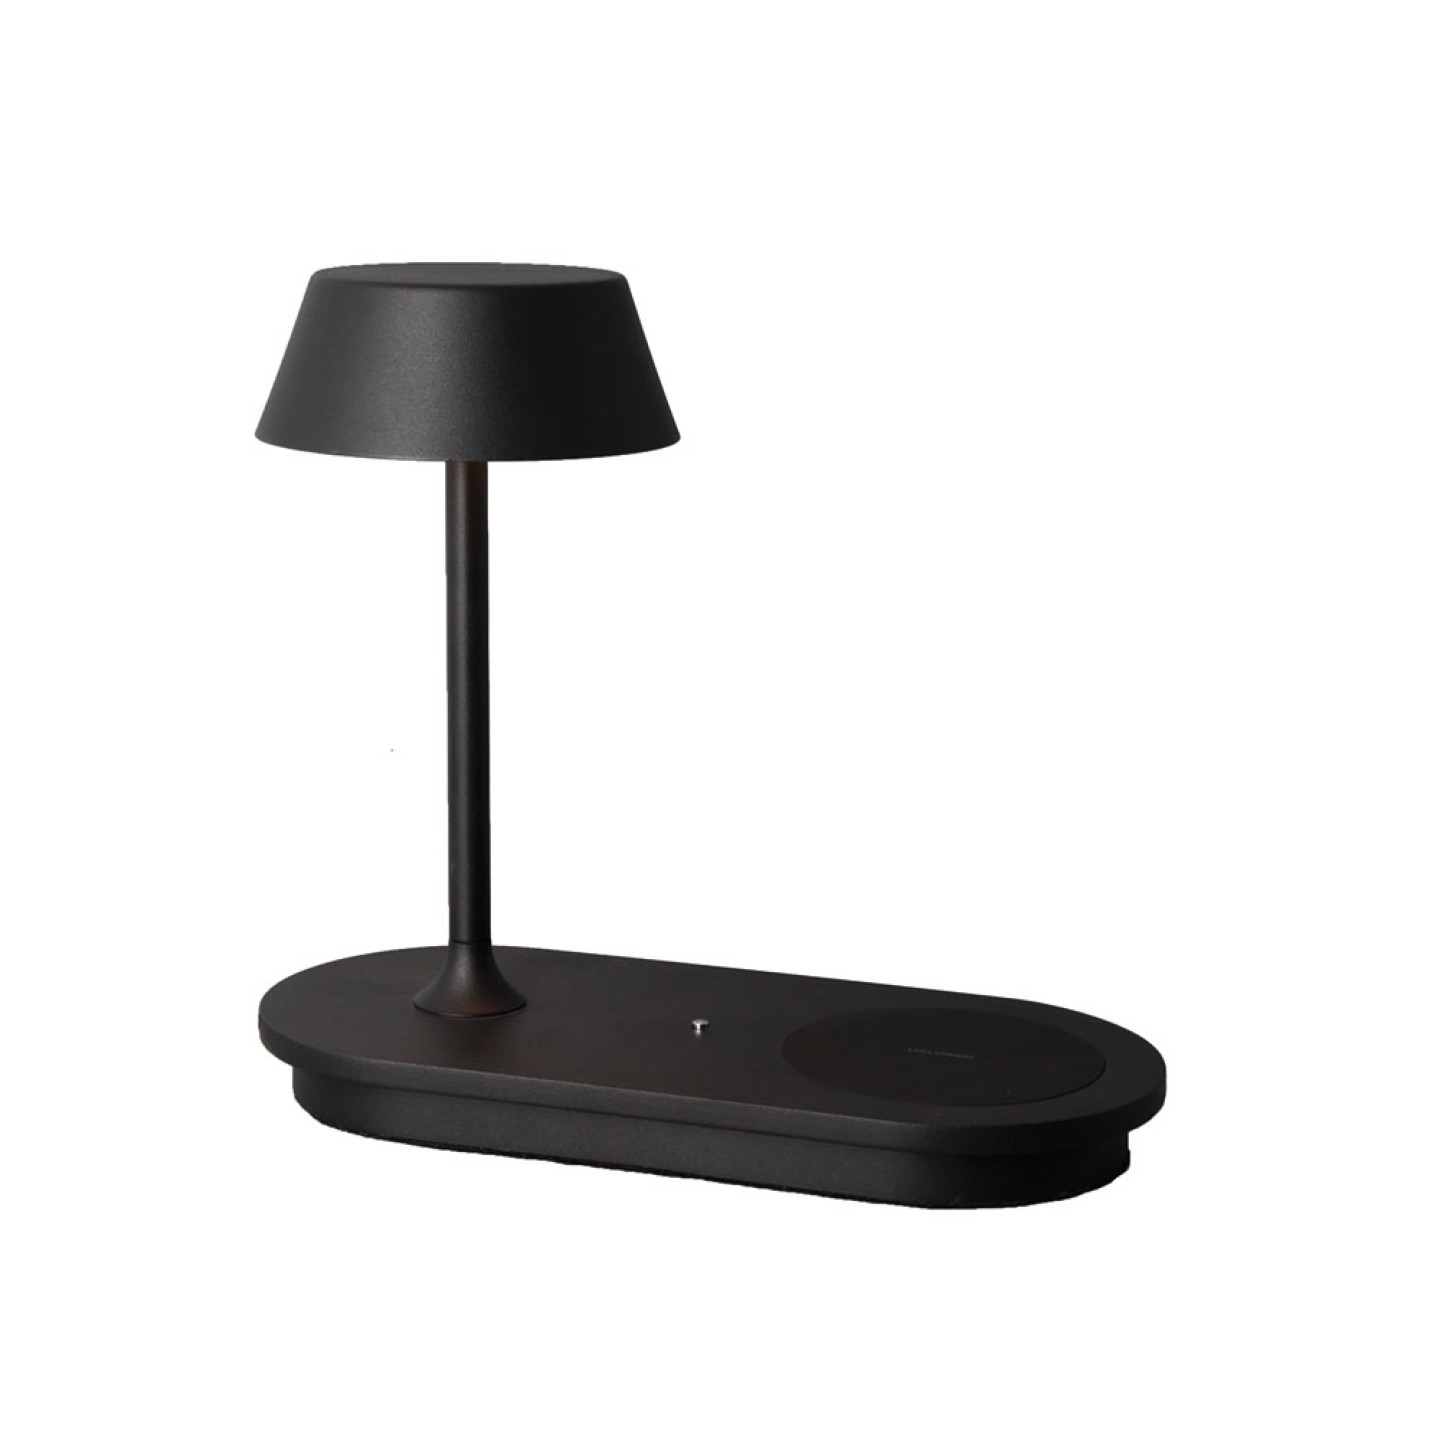 THE KING TABLE LAMP